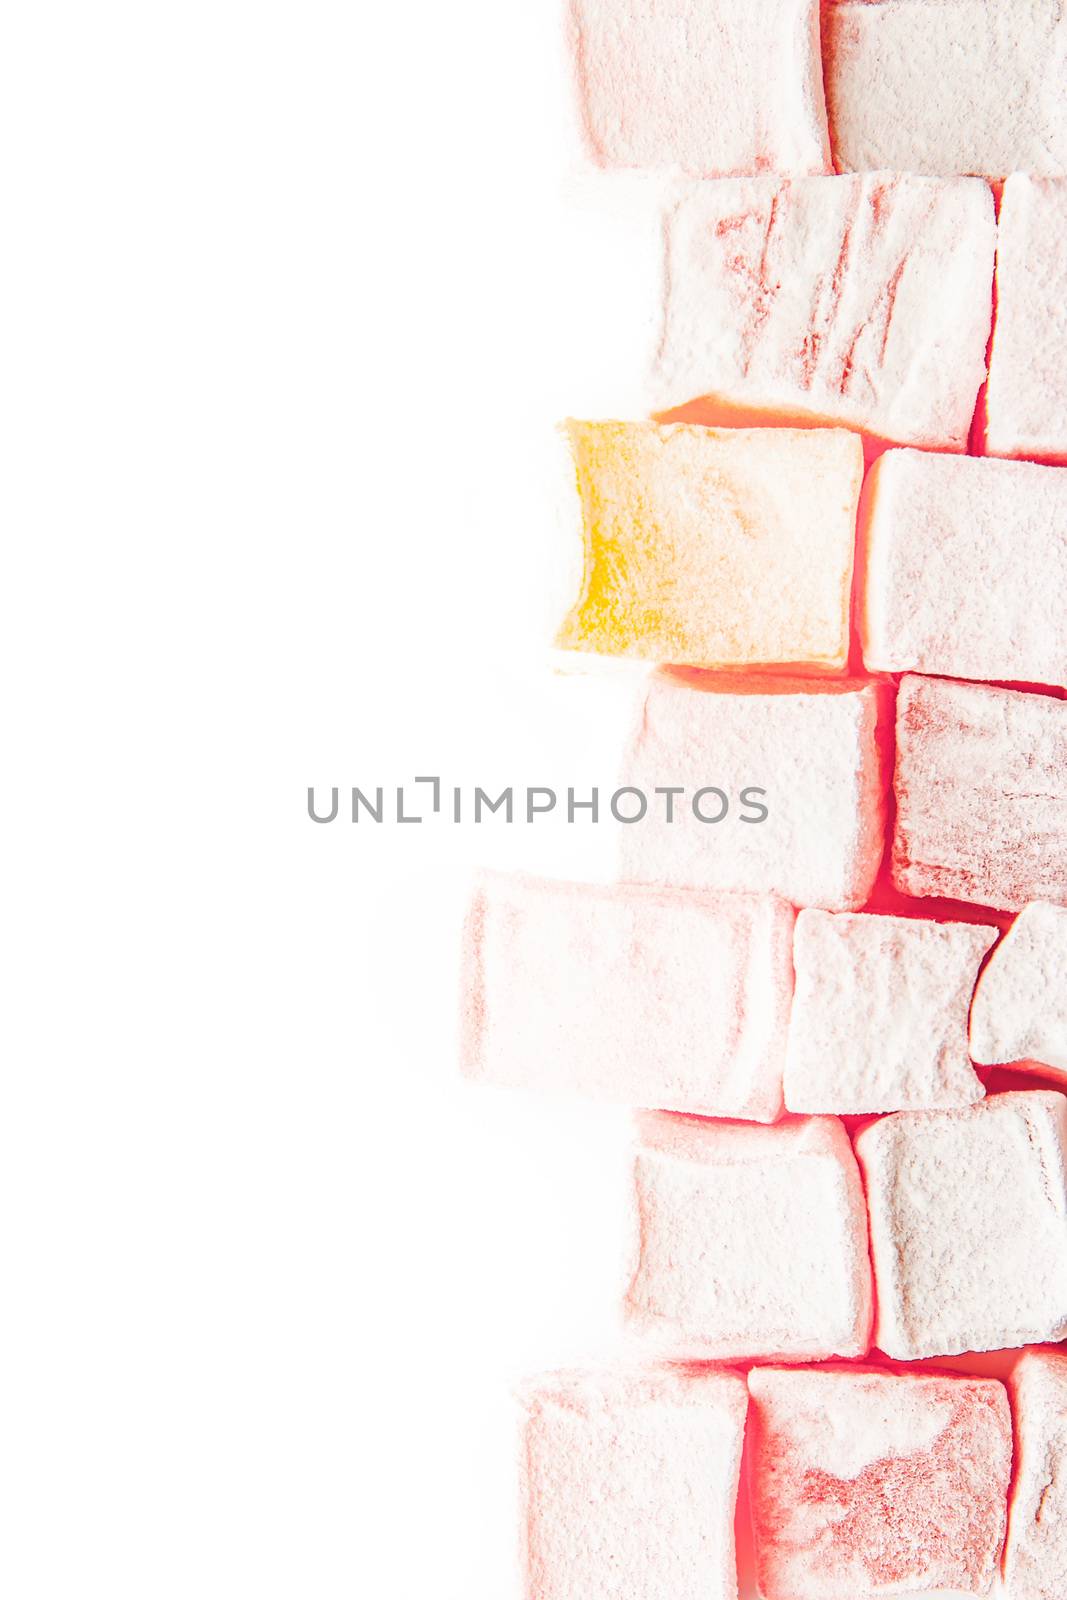 Turkish delight at the right of the white background vertical